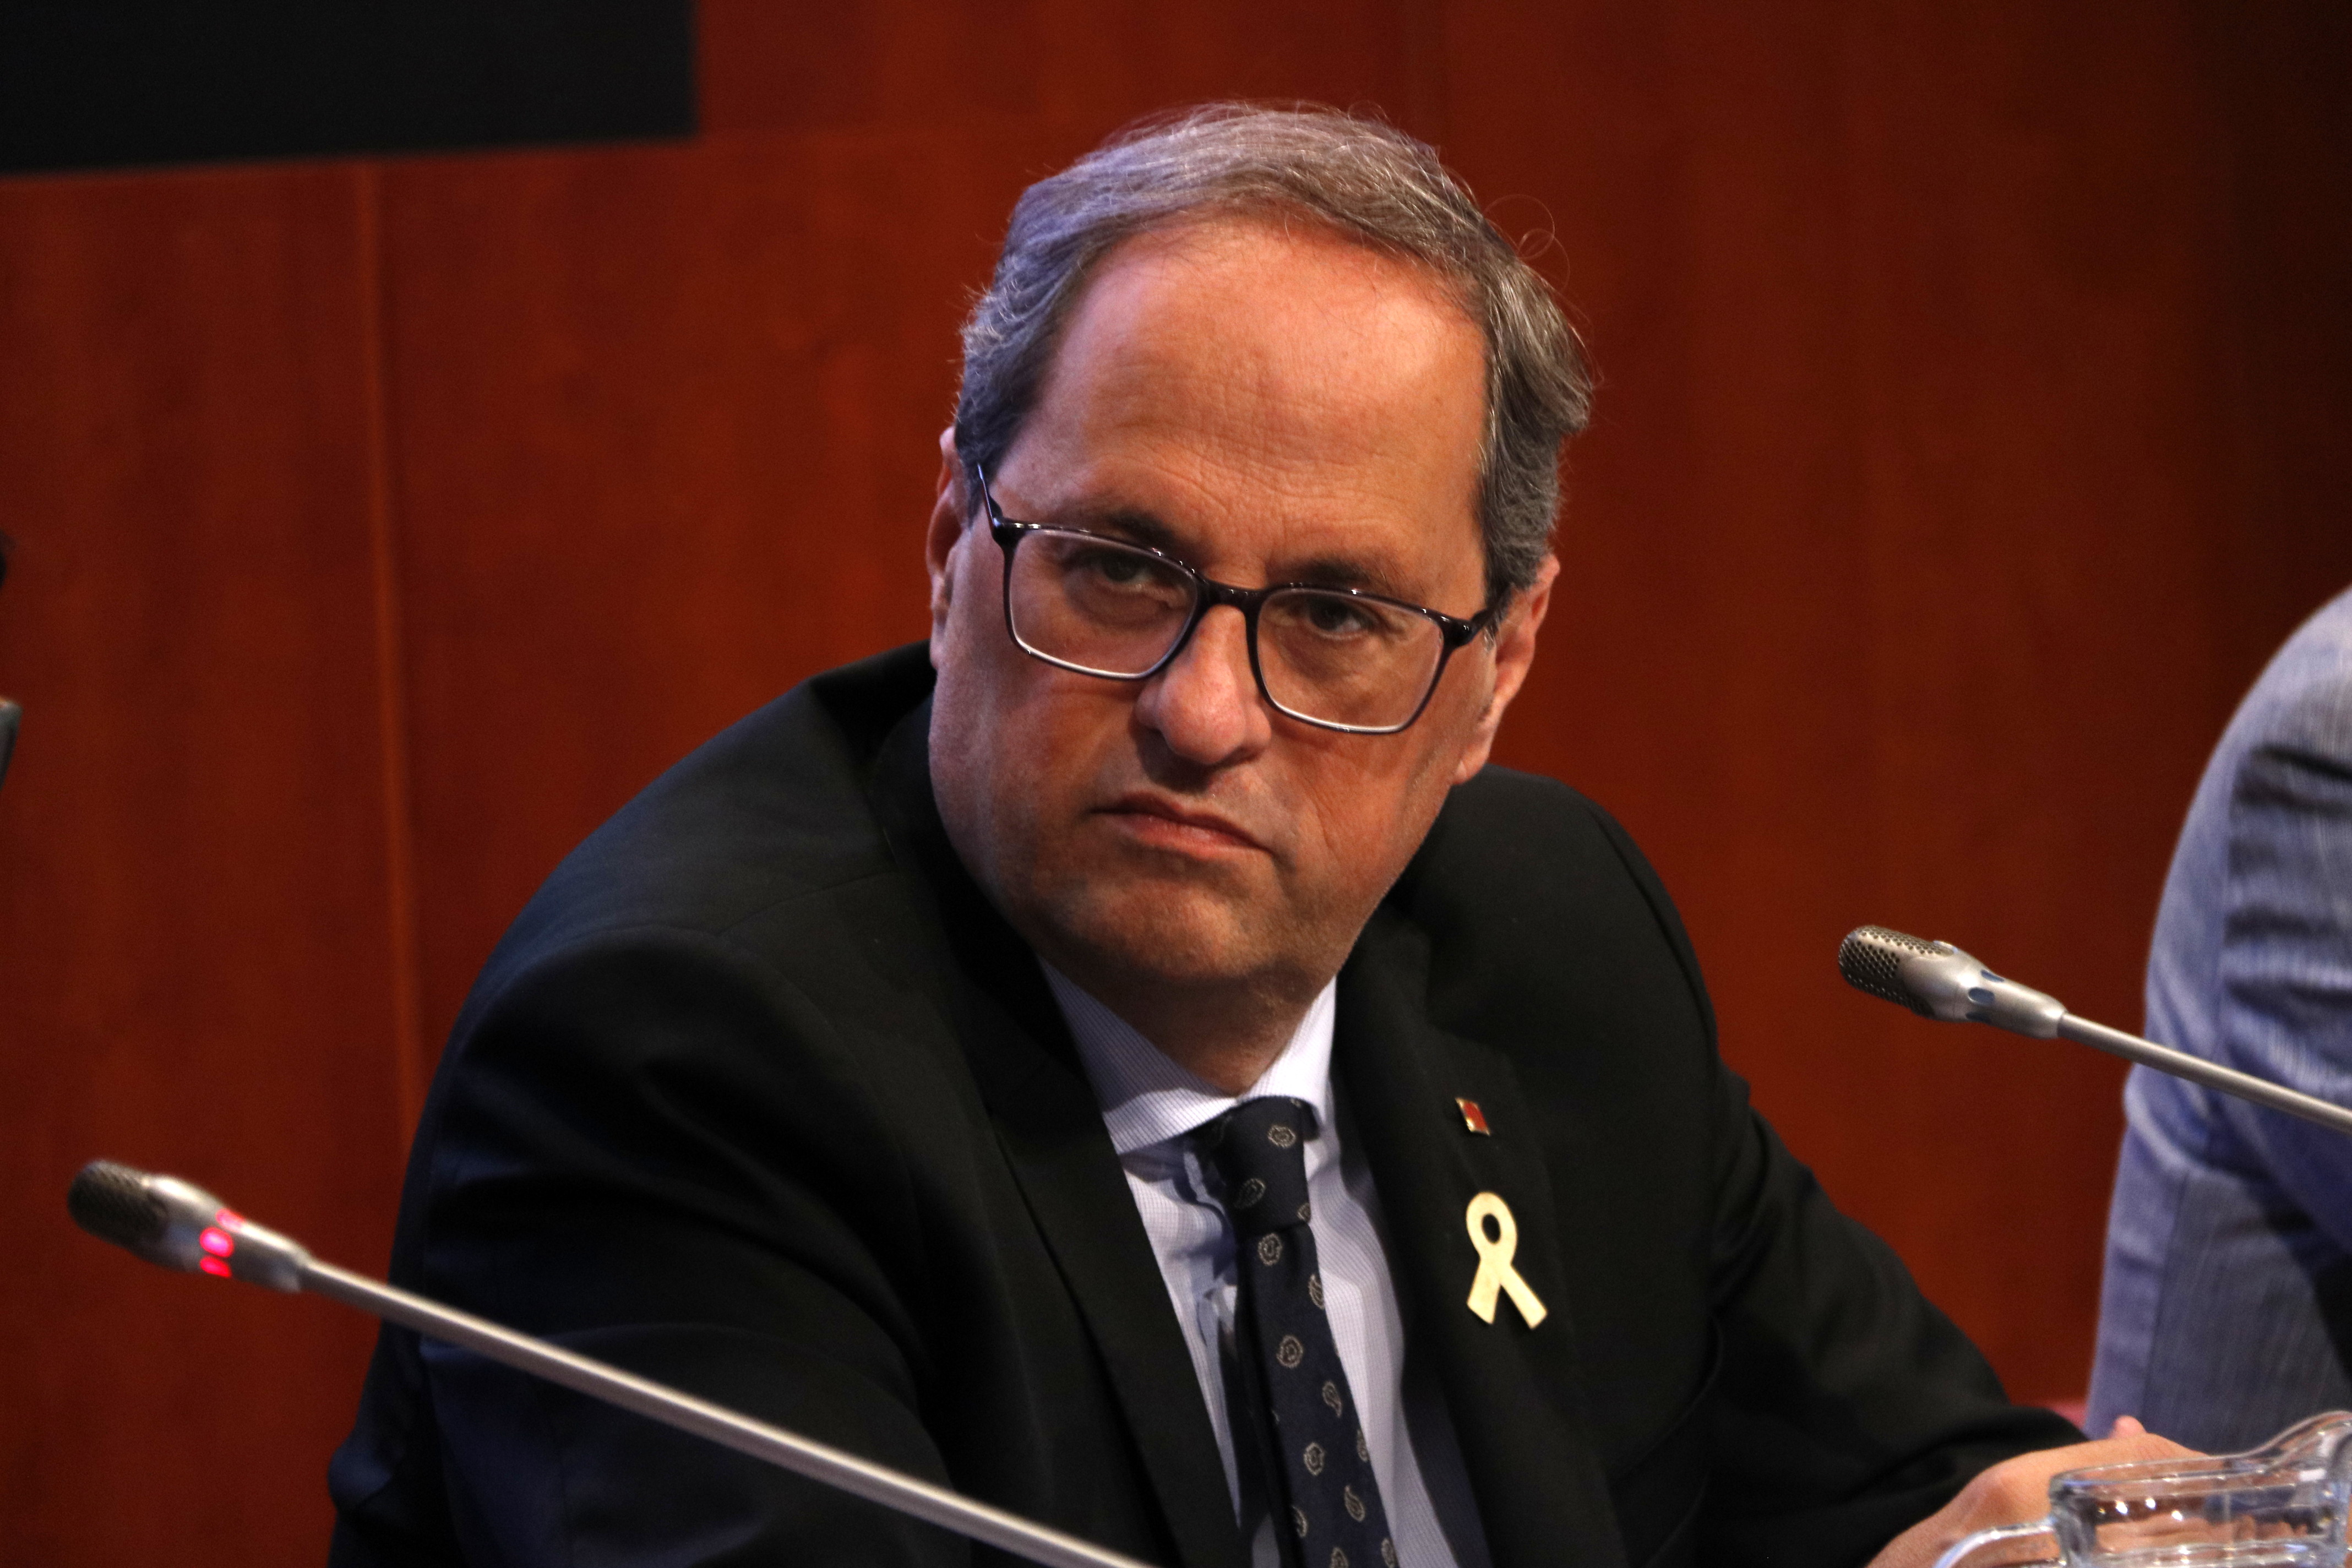 President Quim Torra at an event on May 31 (Guillem Roset/ACN)